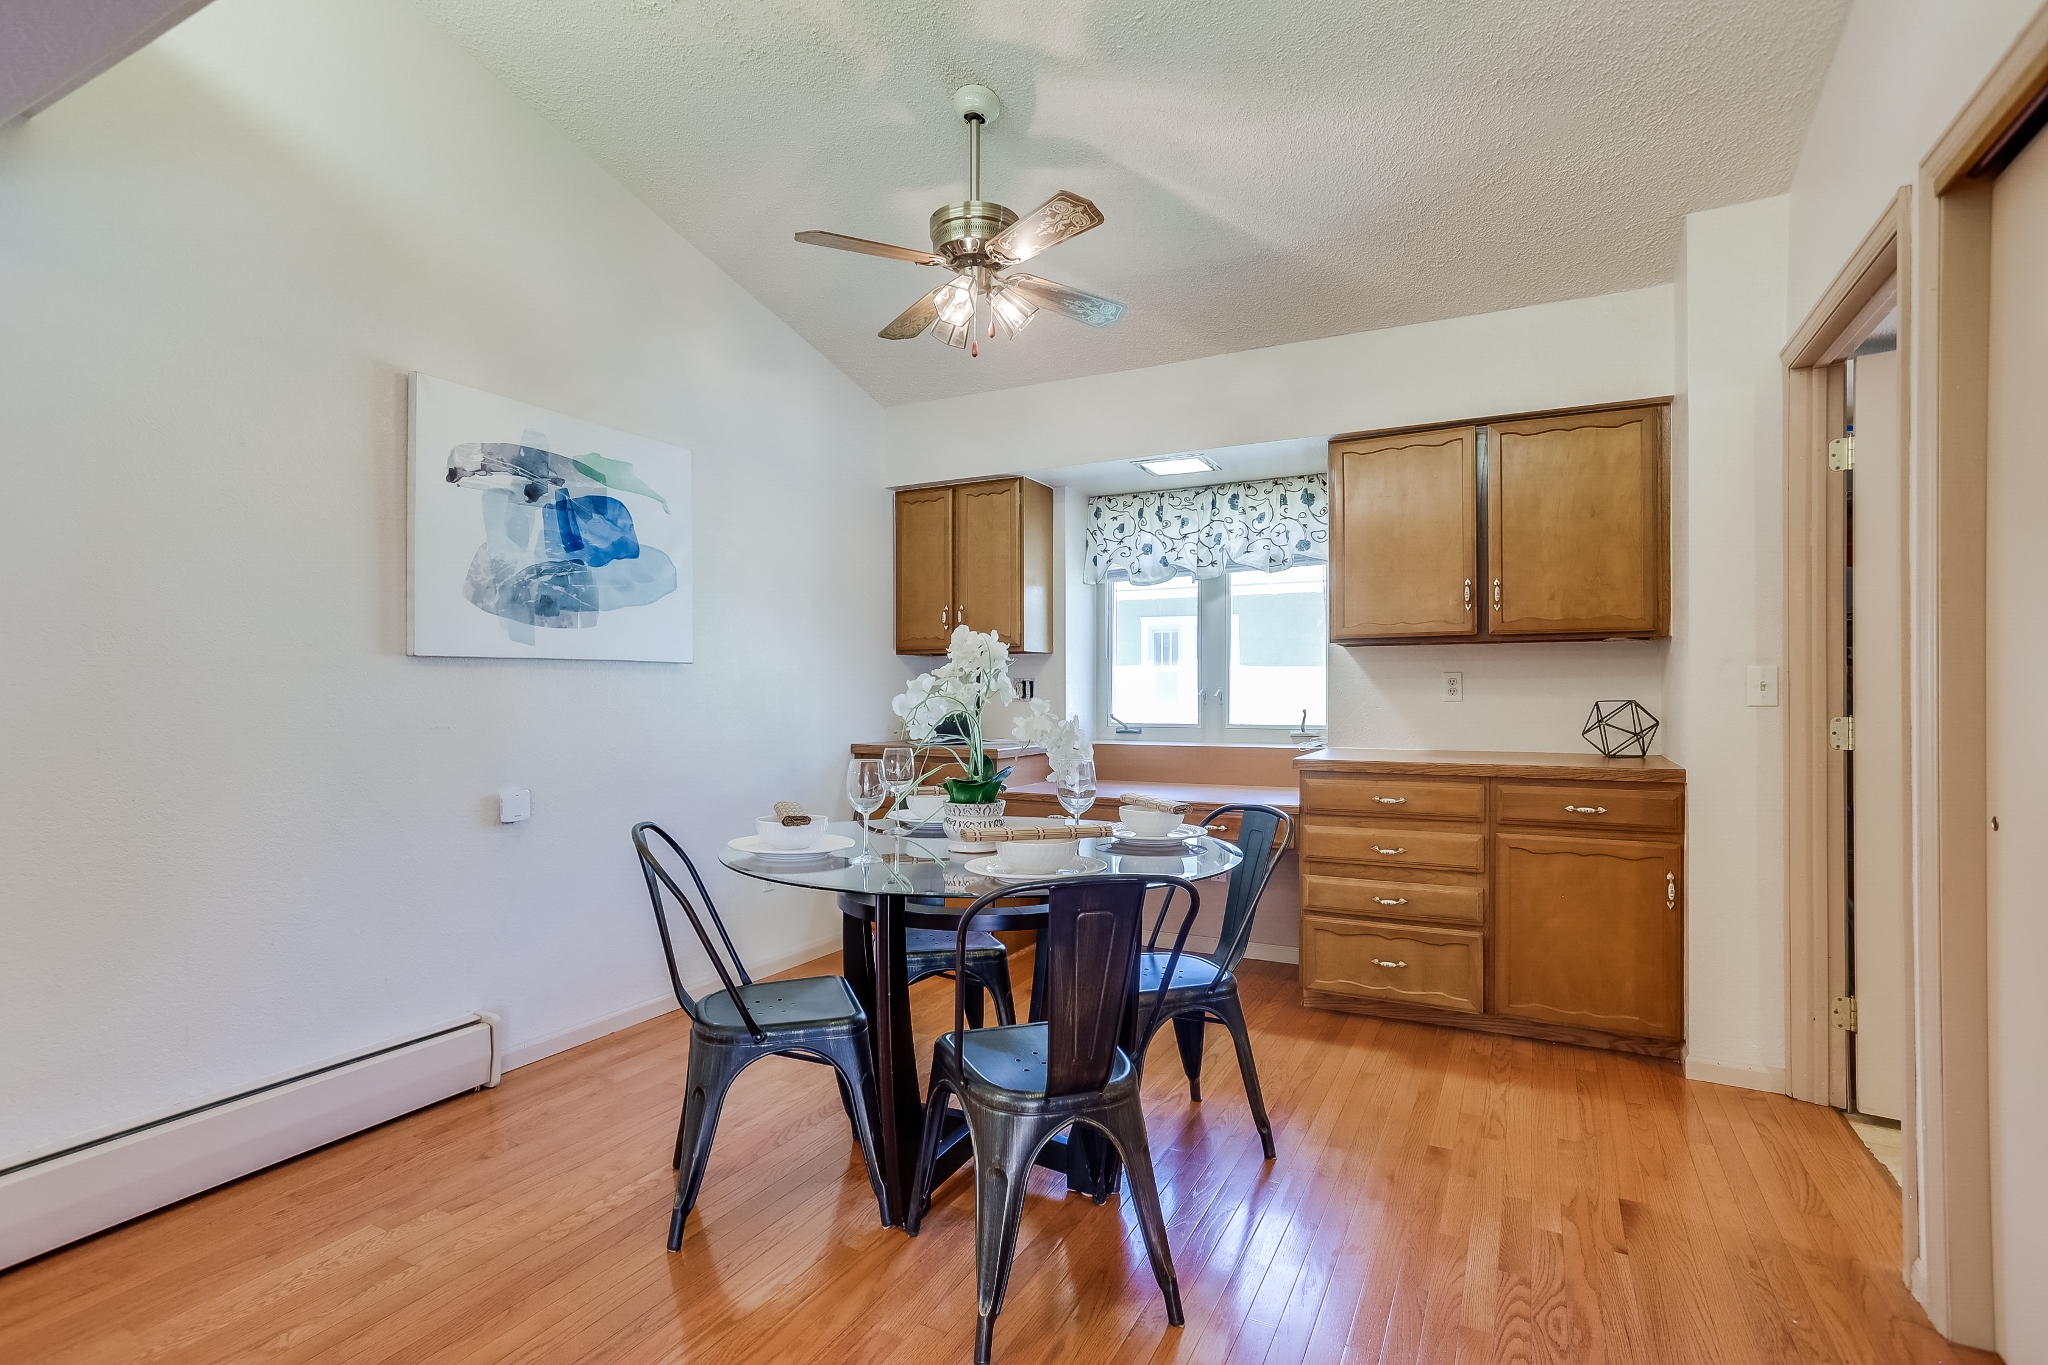 REAL ESTATE LISTING: 1409 Cannon St Louisville Dining Room